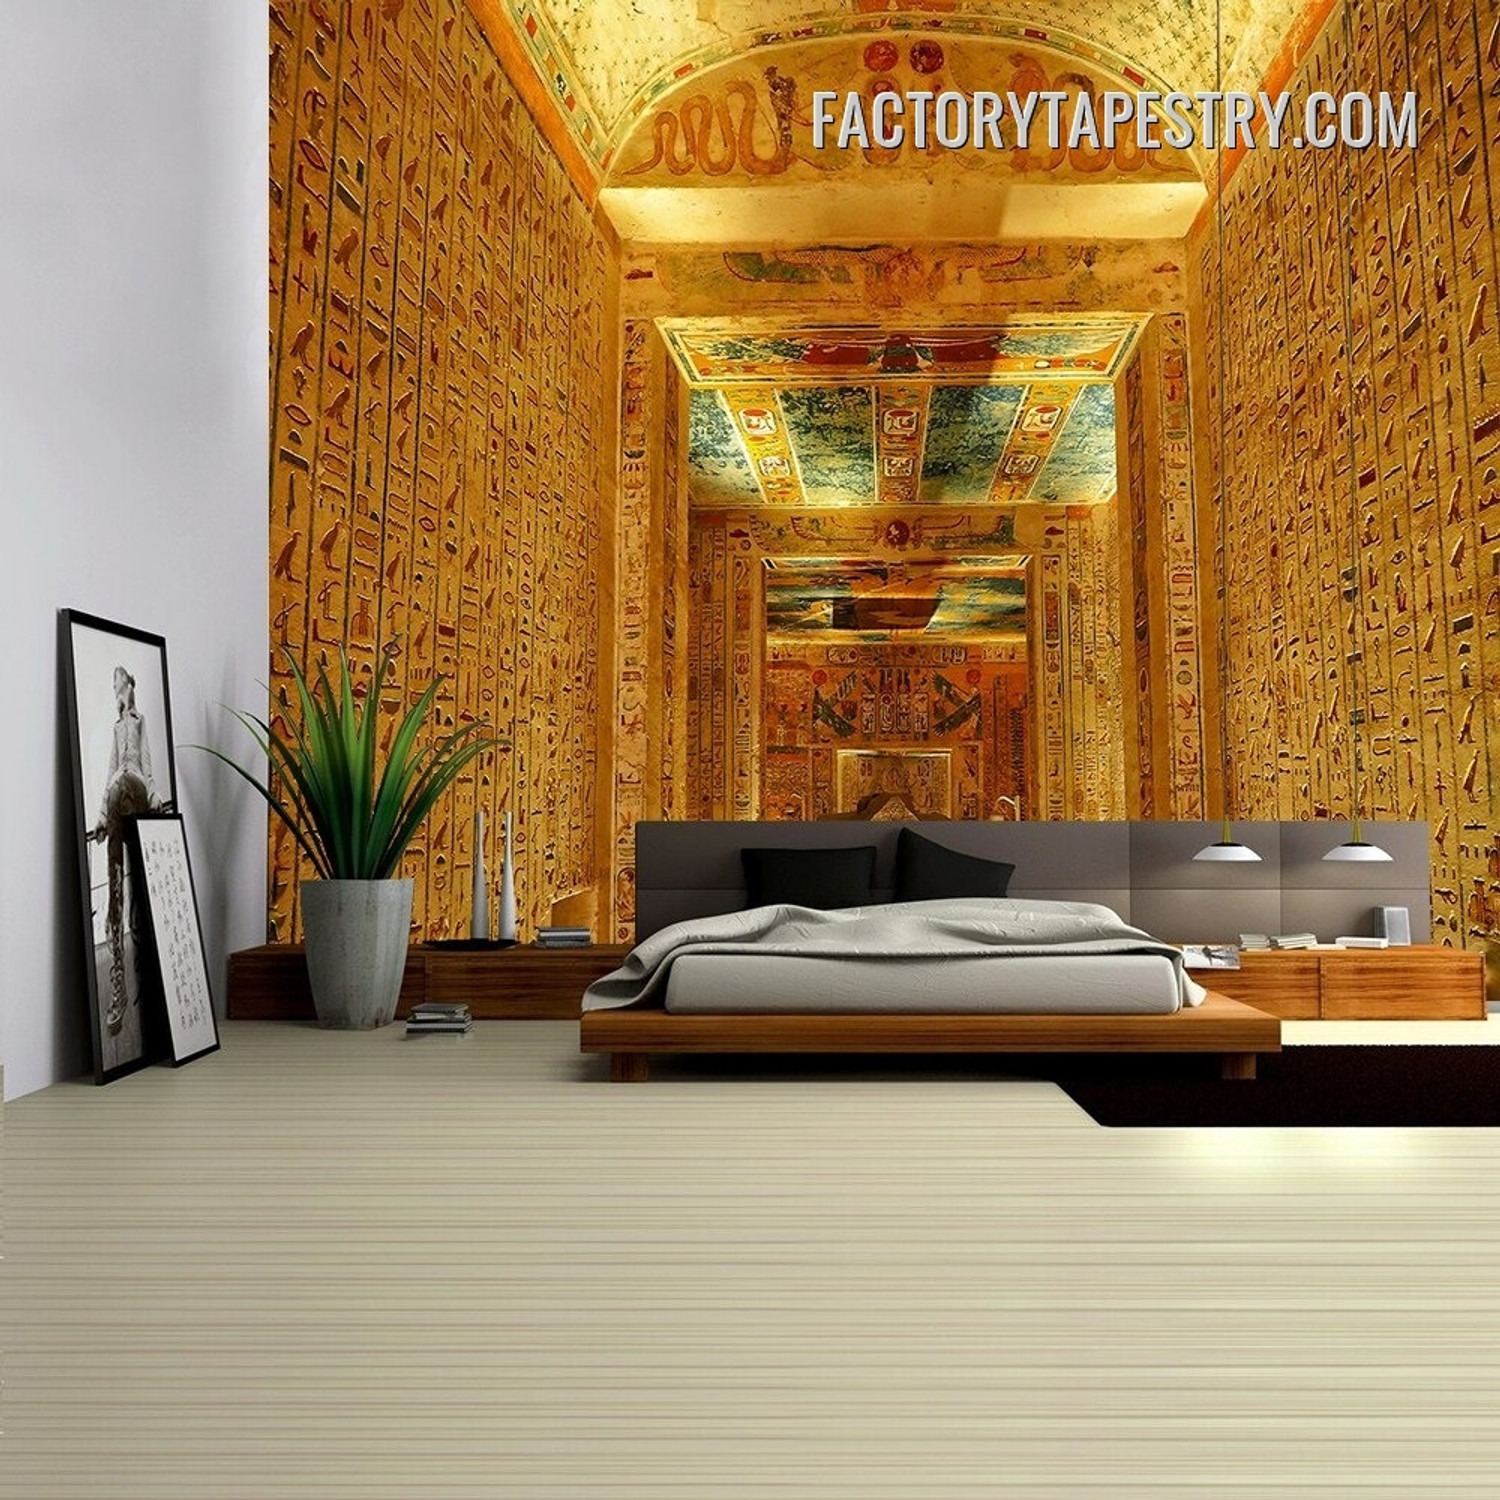 Ancient Egyptian II Retro Vintage Wall Decor Tapestry